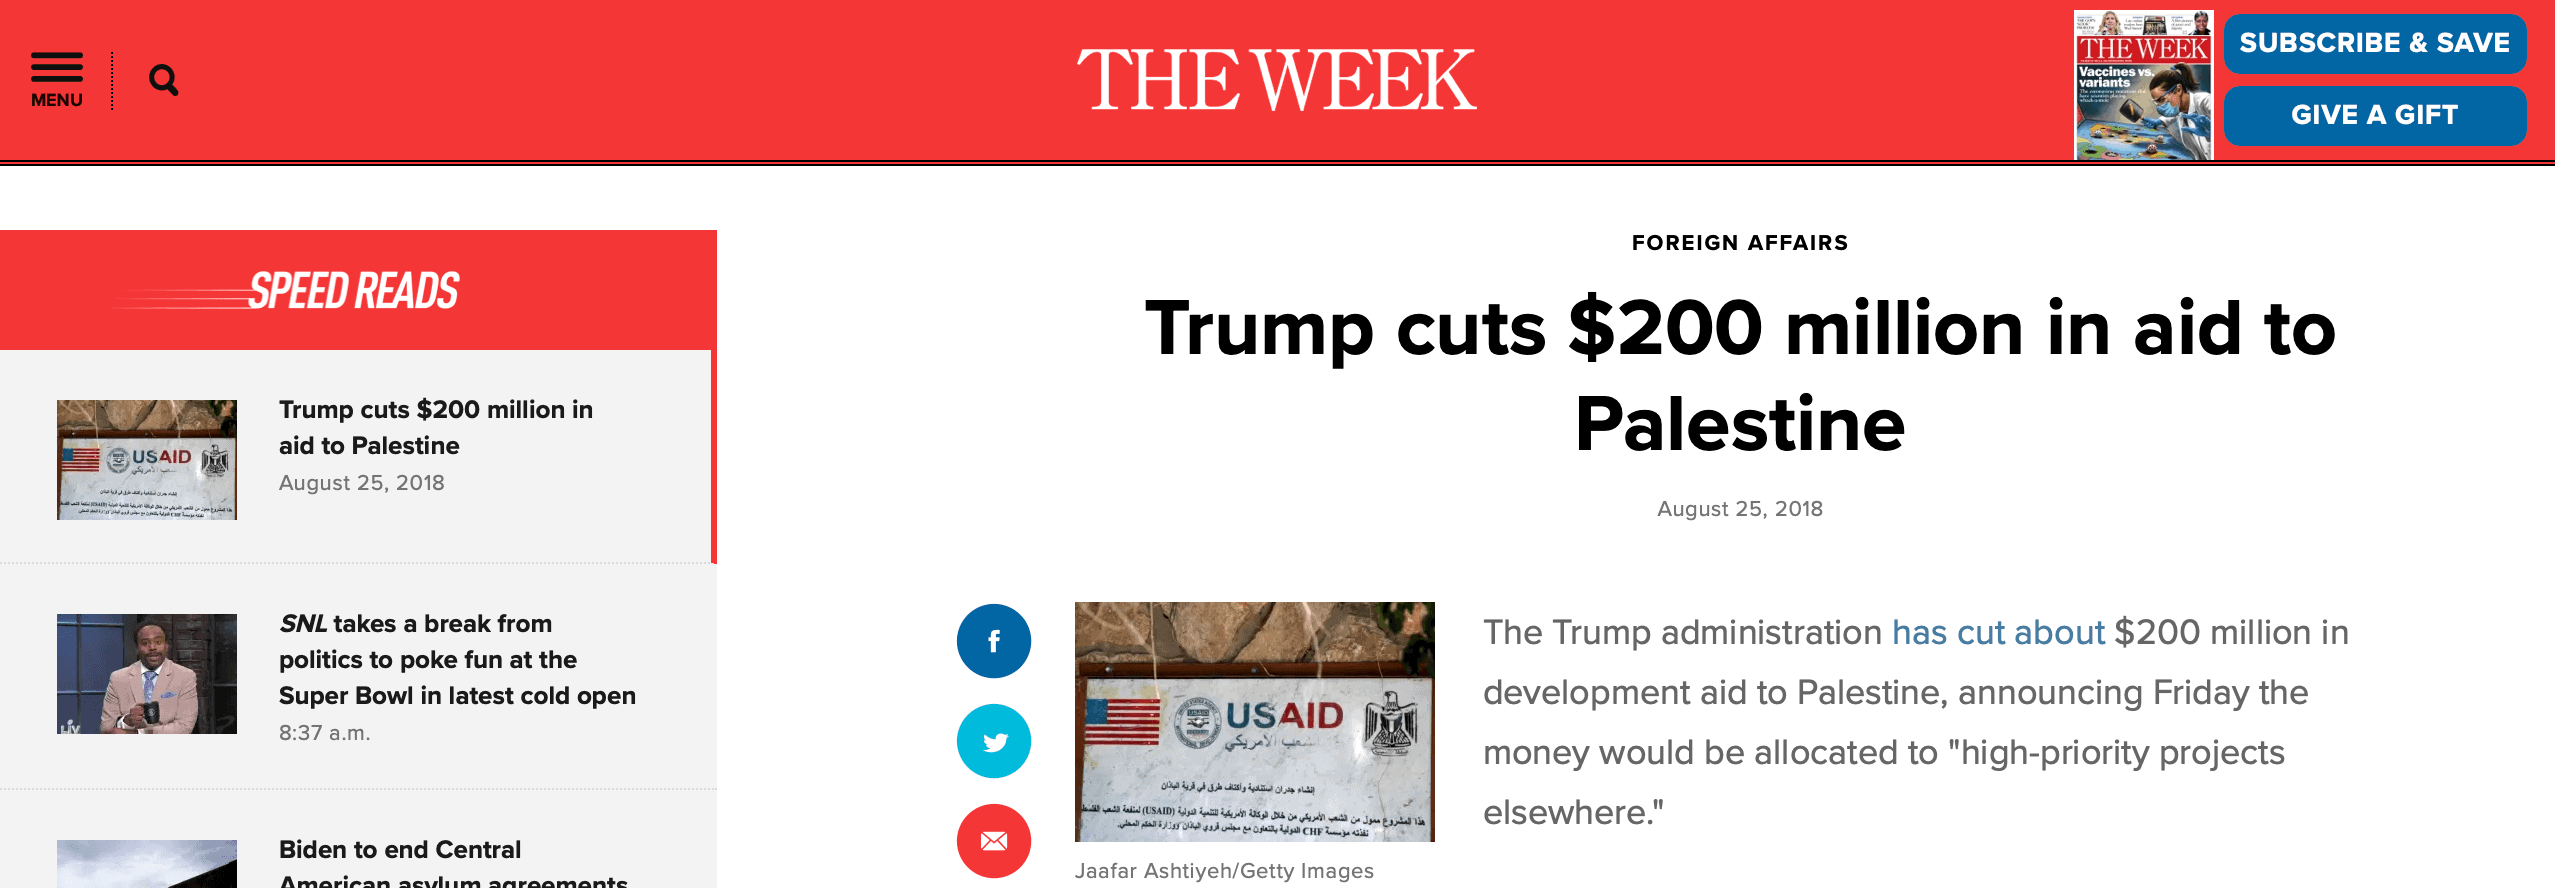 The Week: Trump cuts $200 million in aid to Palestine